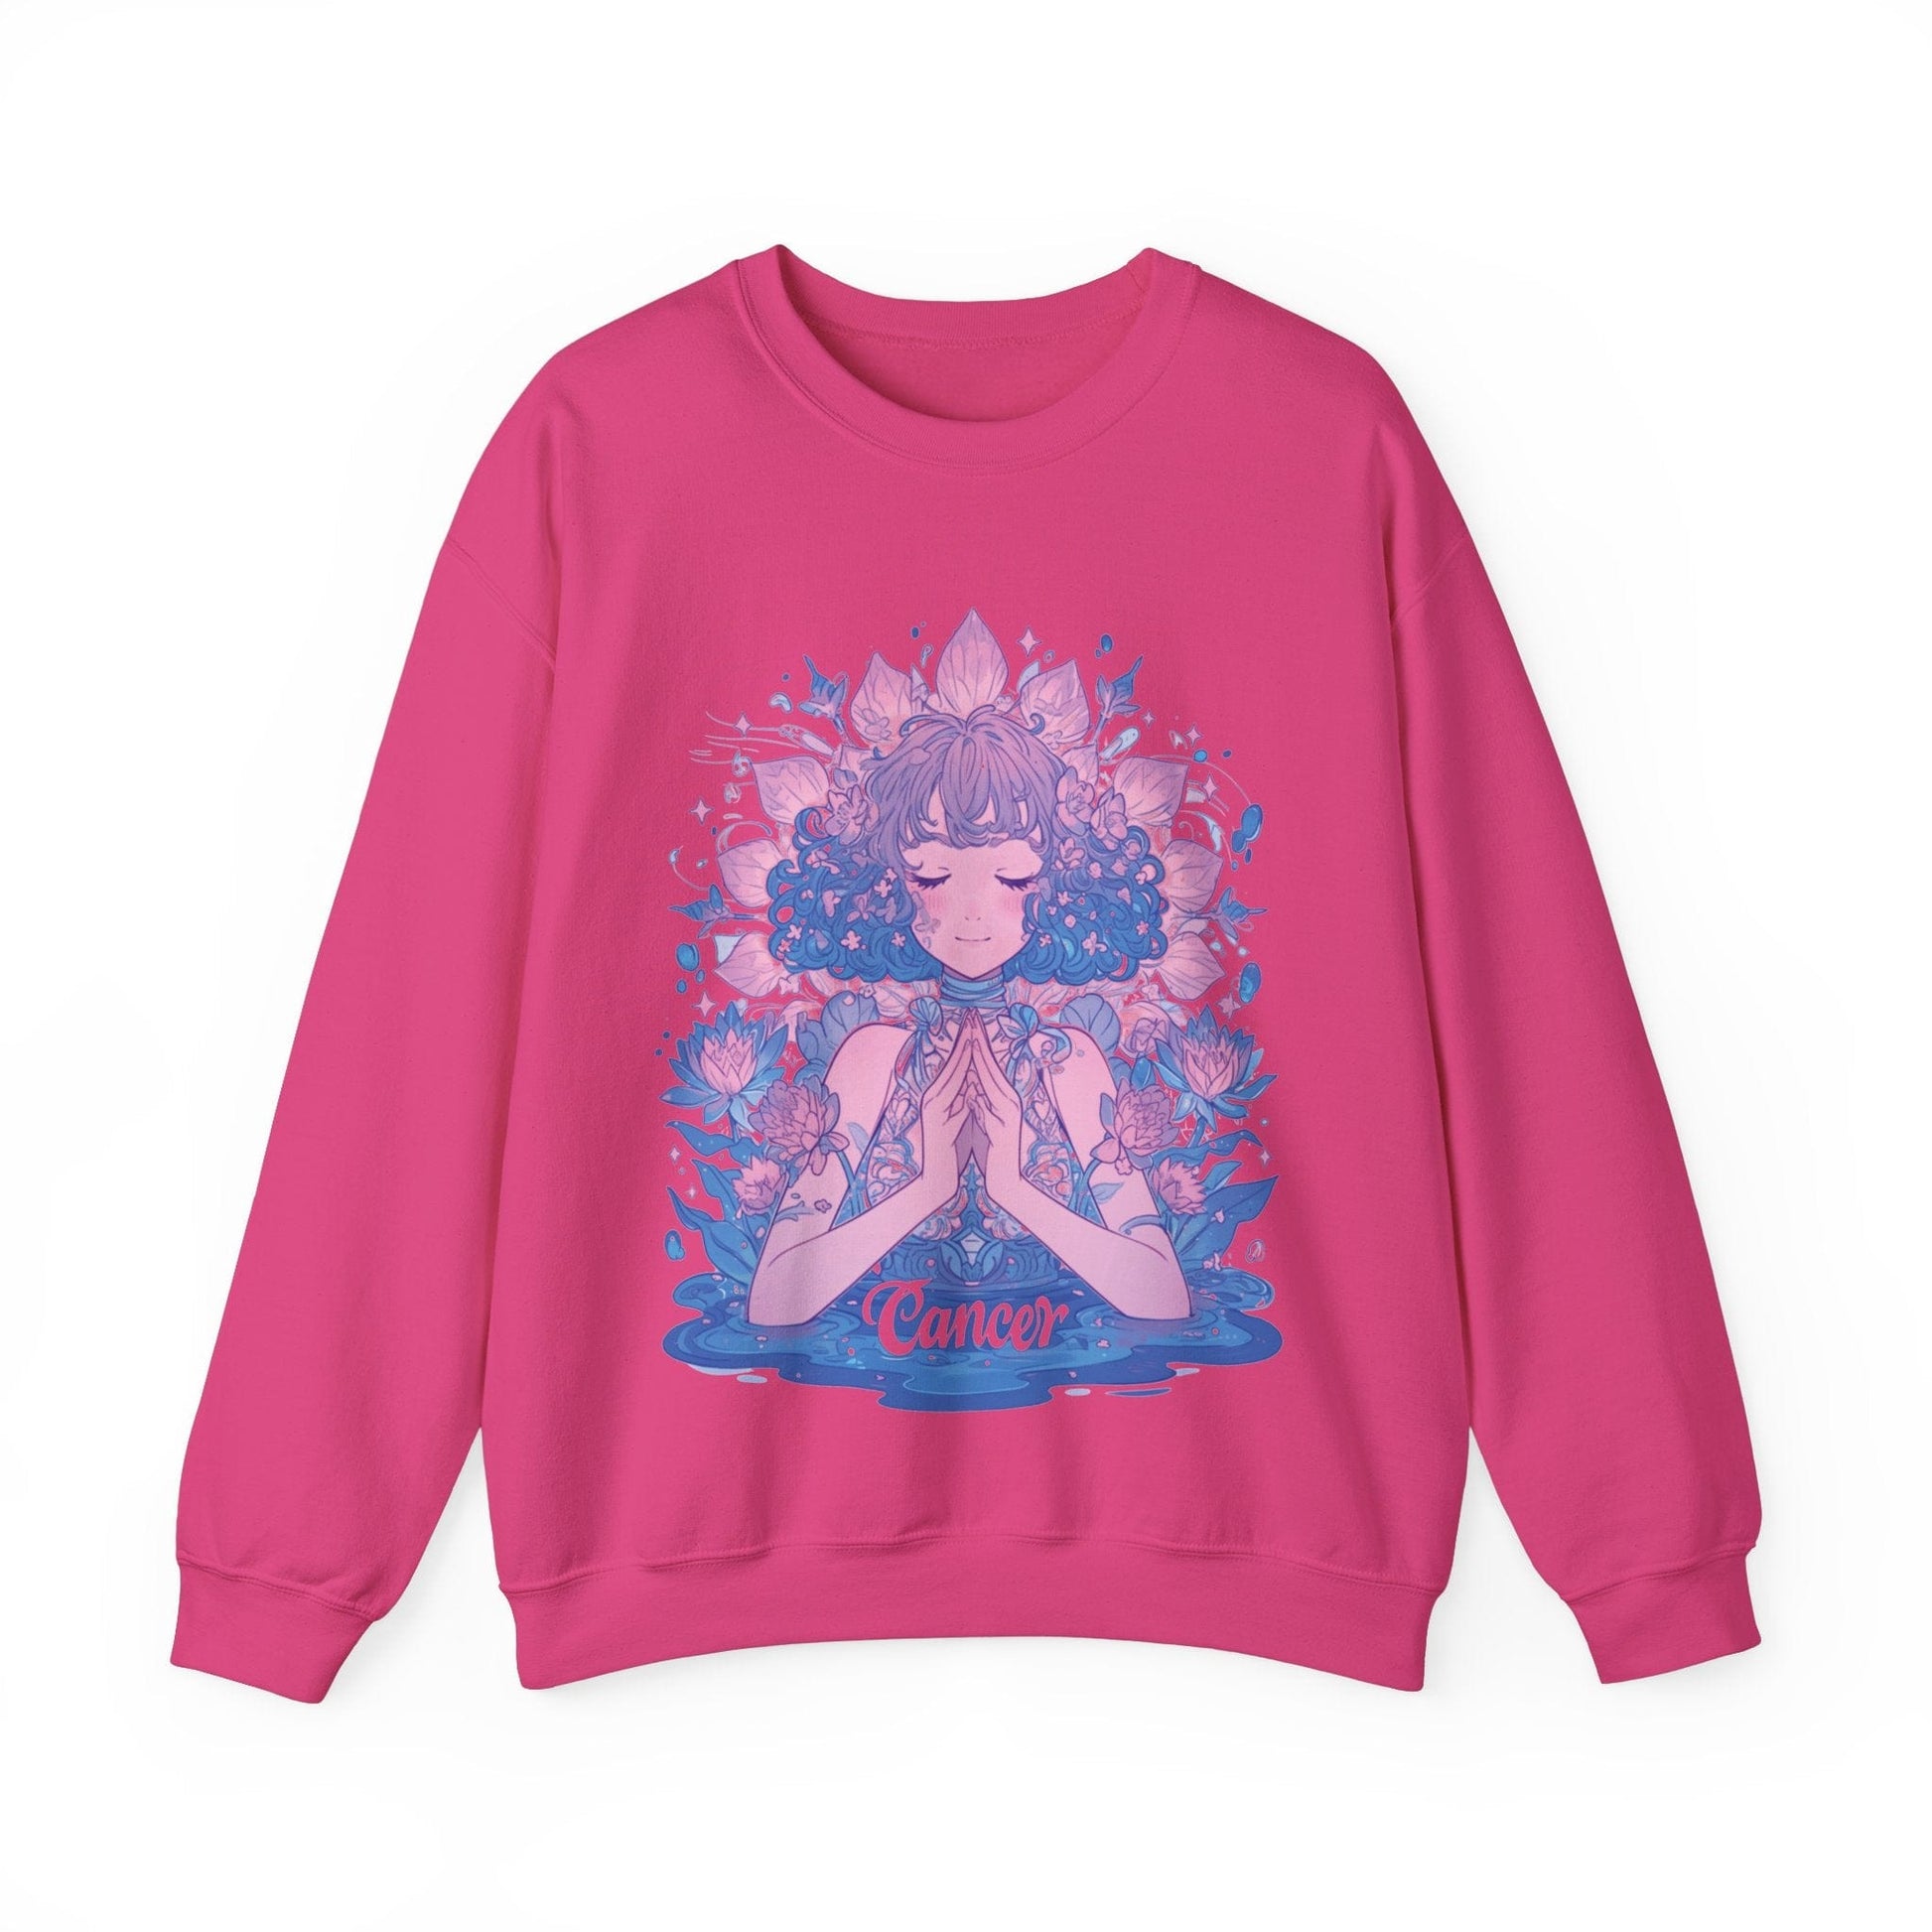 Sweatshirt S / Heliconia Lunar Bloom Cancer Sweater: Embrace Tranquility